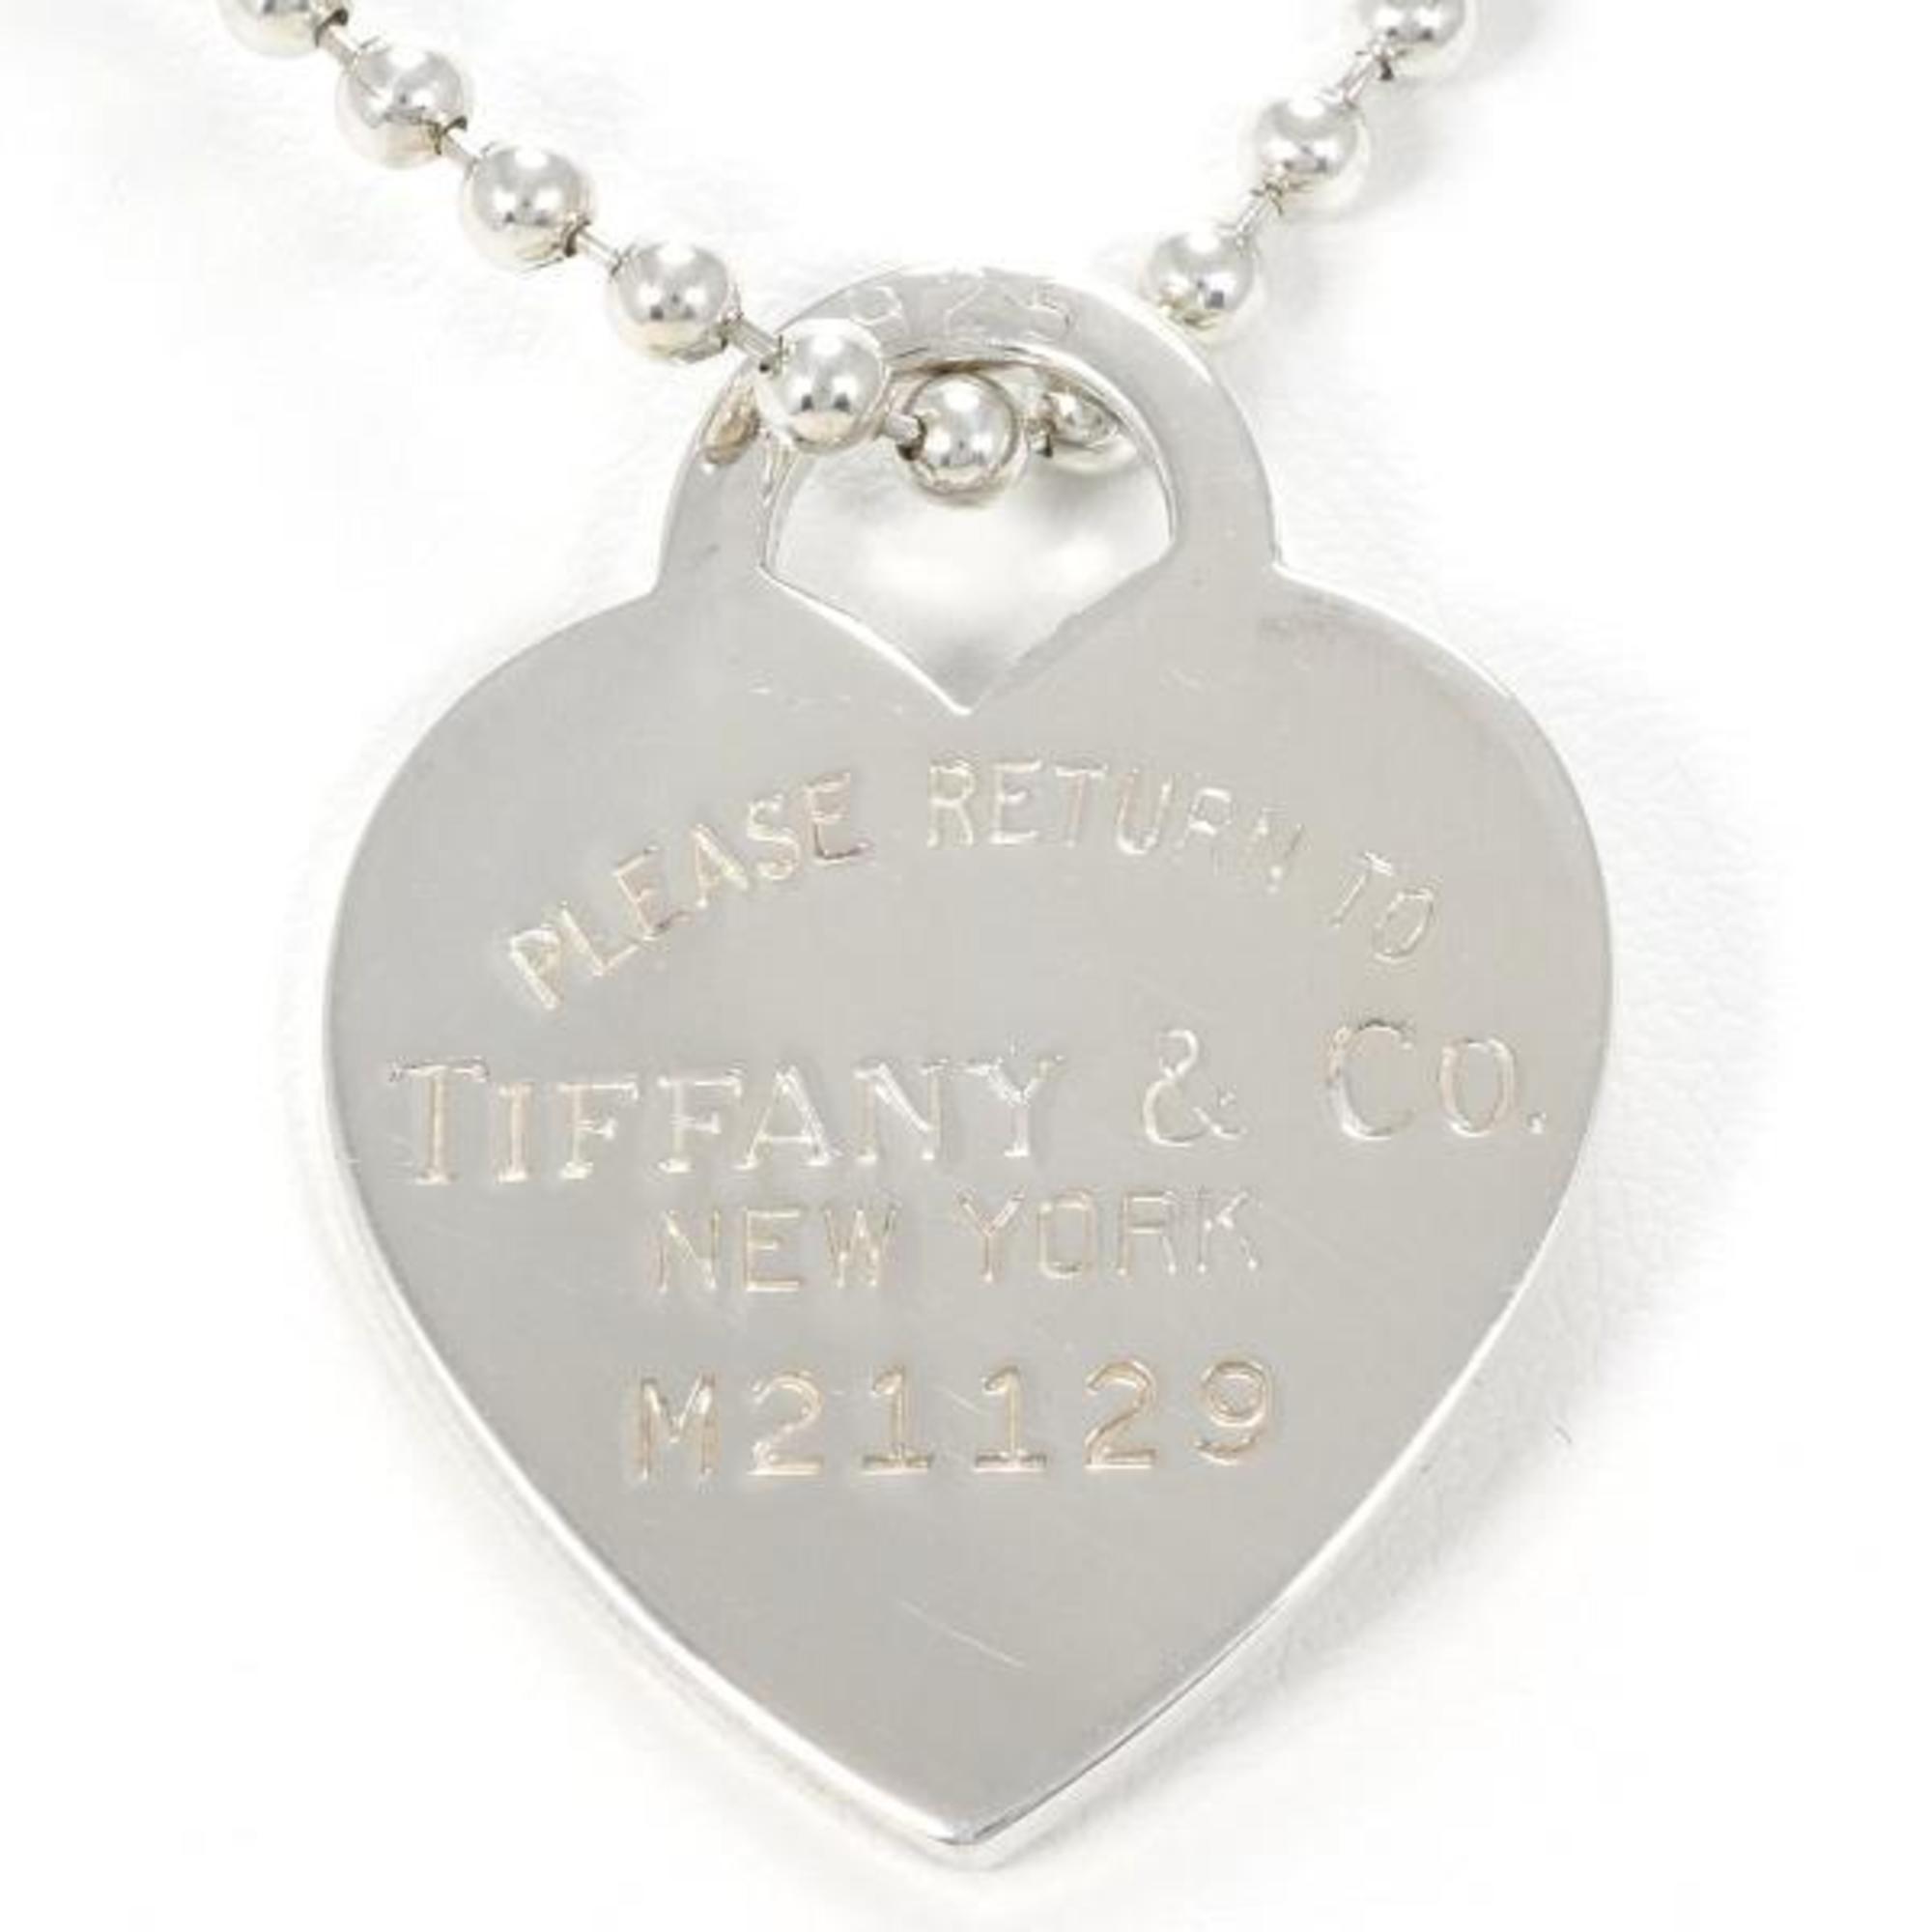 Tiffany Return to Heart Silver Necklace Total Weight Approx. 22.0g 86cm Jewelry